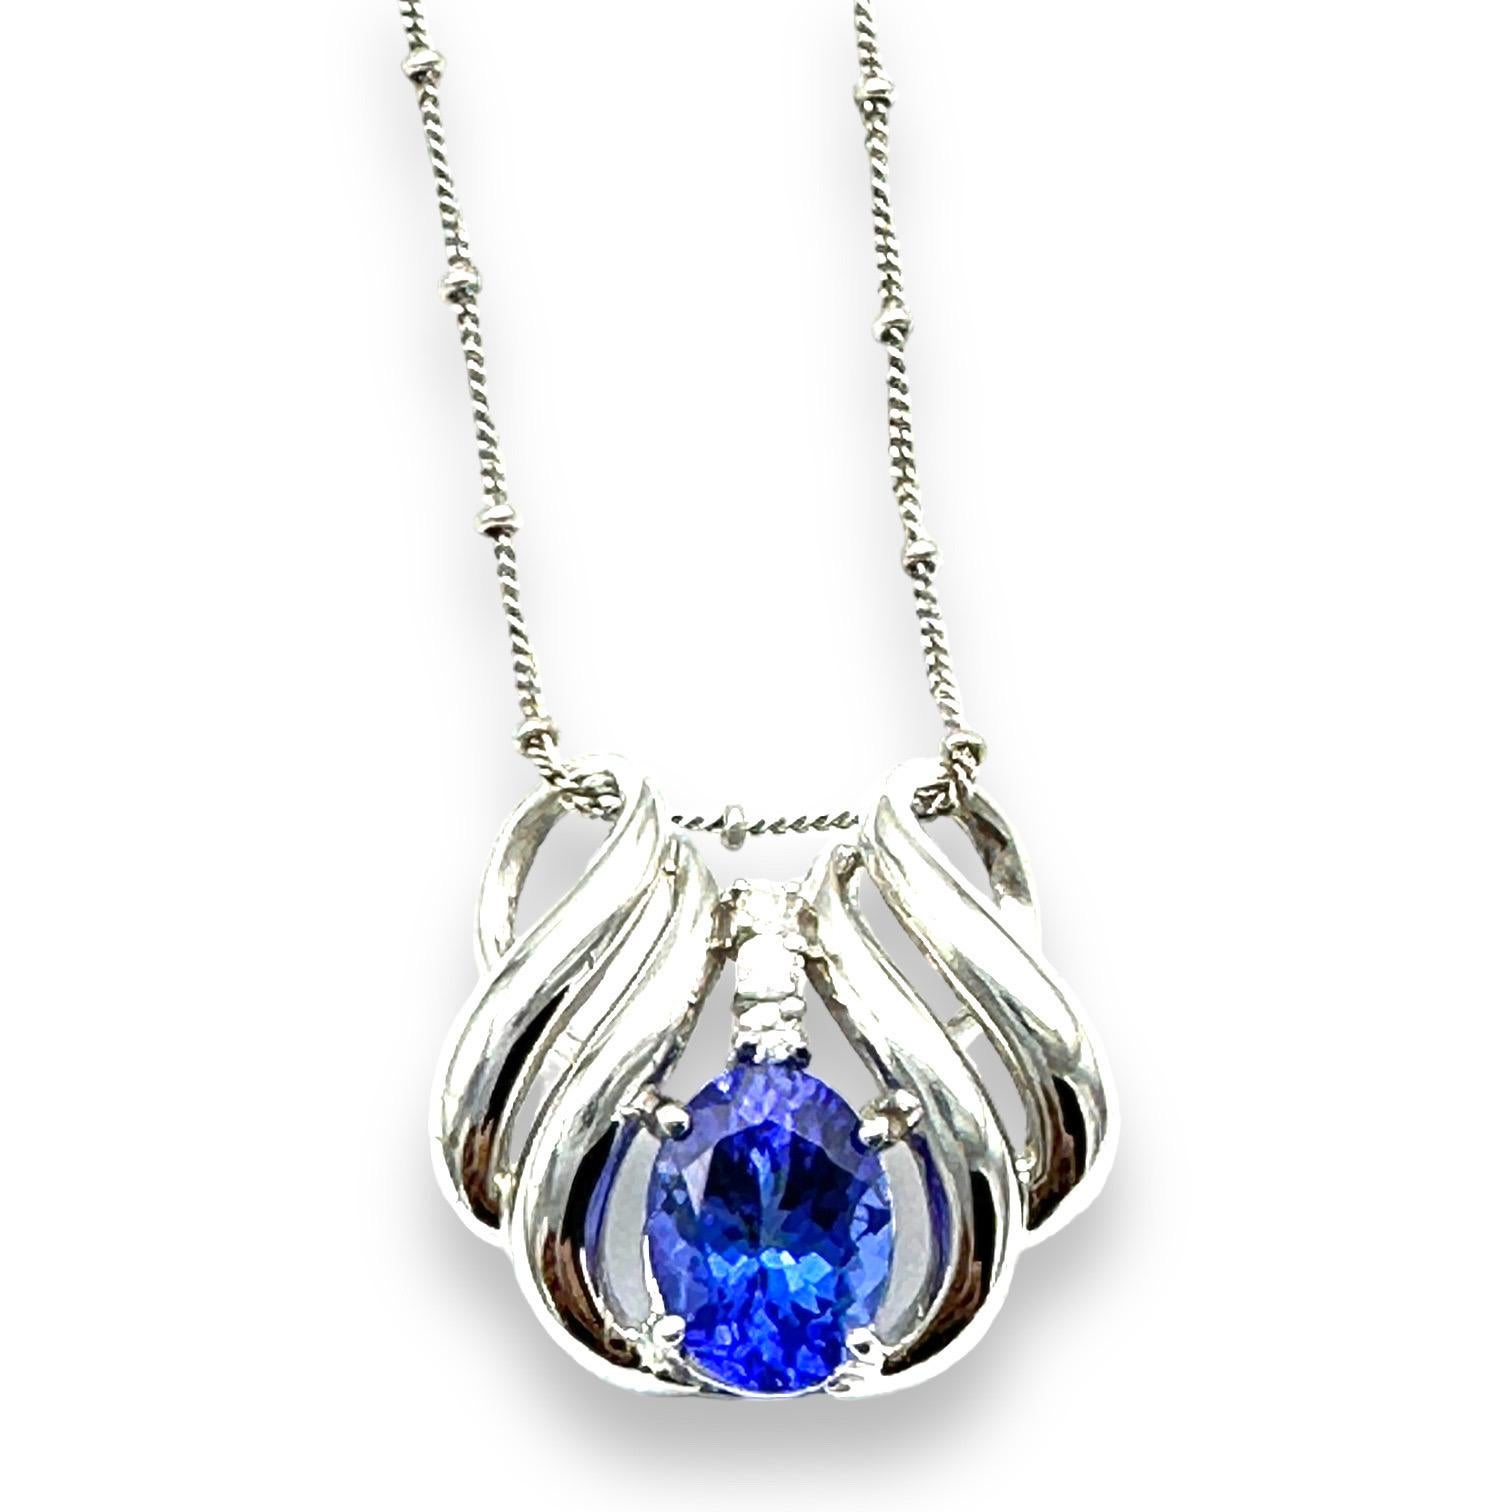 14K white gold diamond and tanzanite slide pendant on chain measuring 25mm x 23mm wide. The chain is 18 inches in length.
The tanzanite is a beautiful oval-shaped gemstone measuring 11 x 8.50 mm in diameter and is estimated as 3.00 carats. Accenting